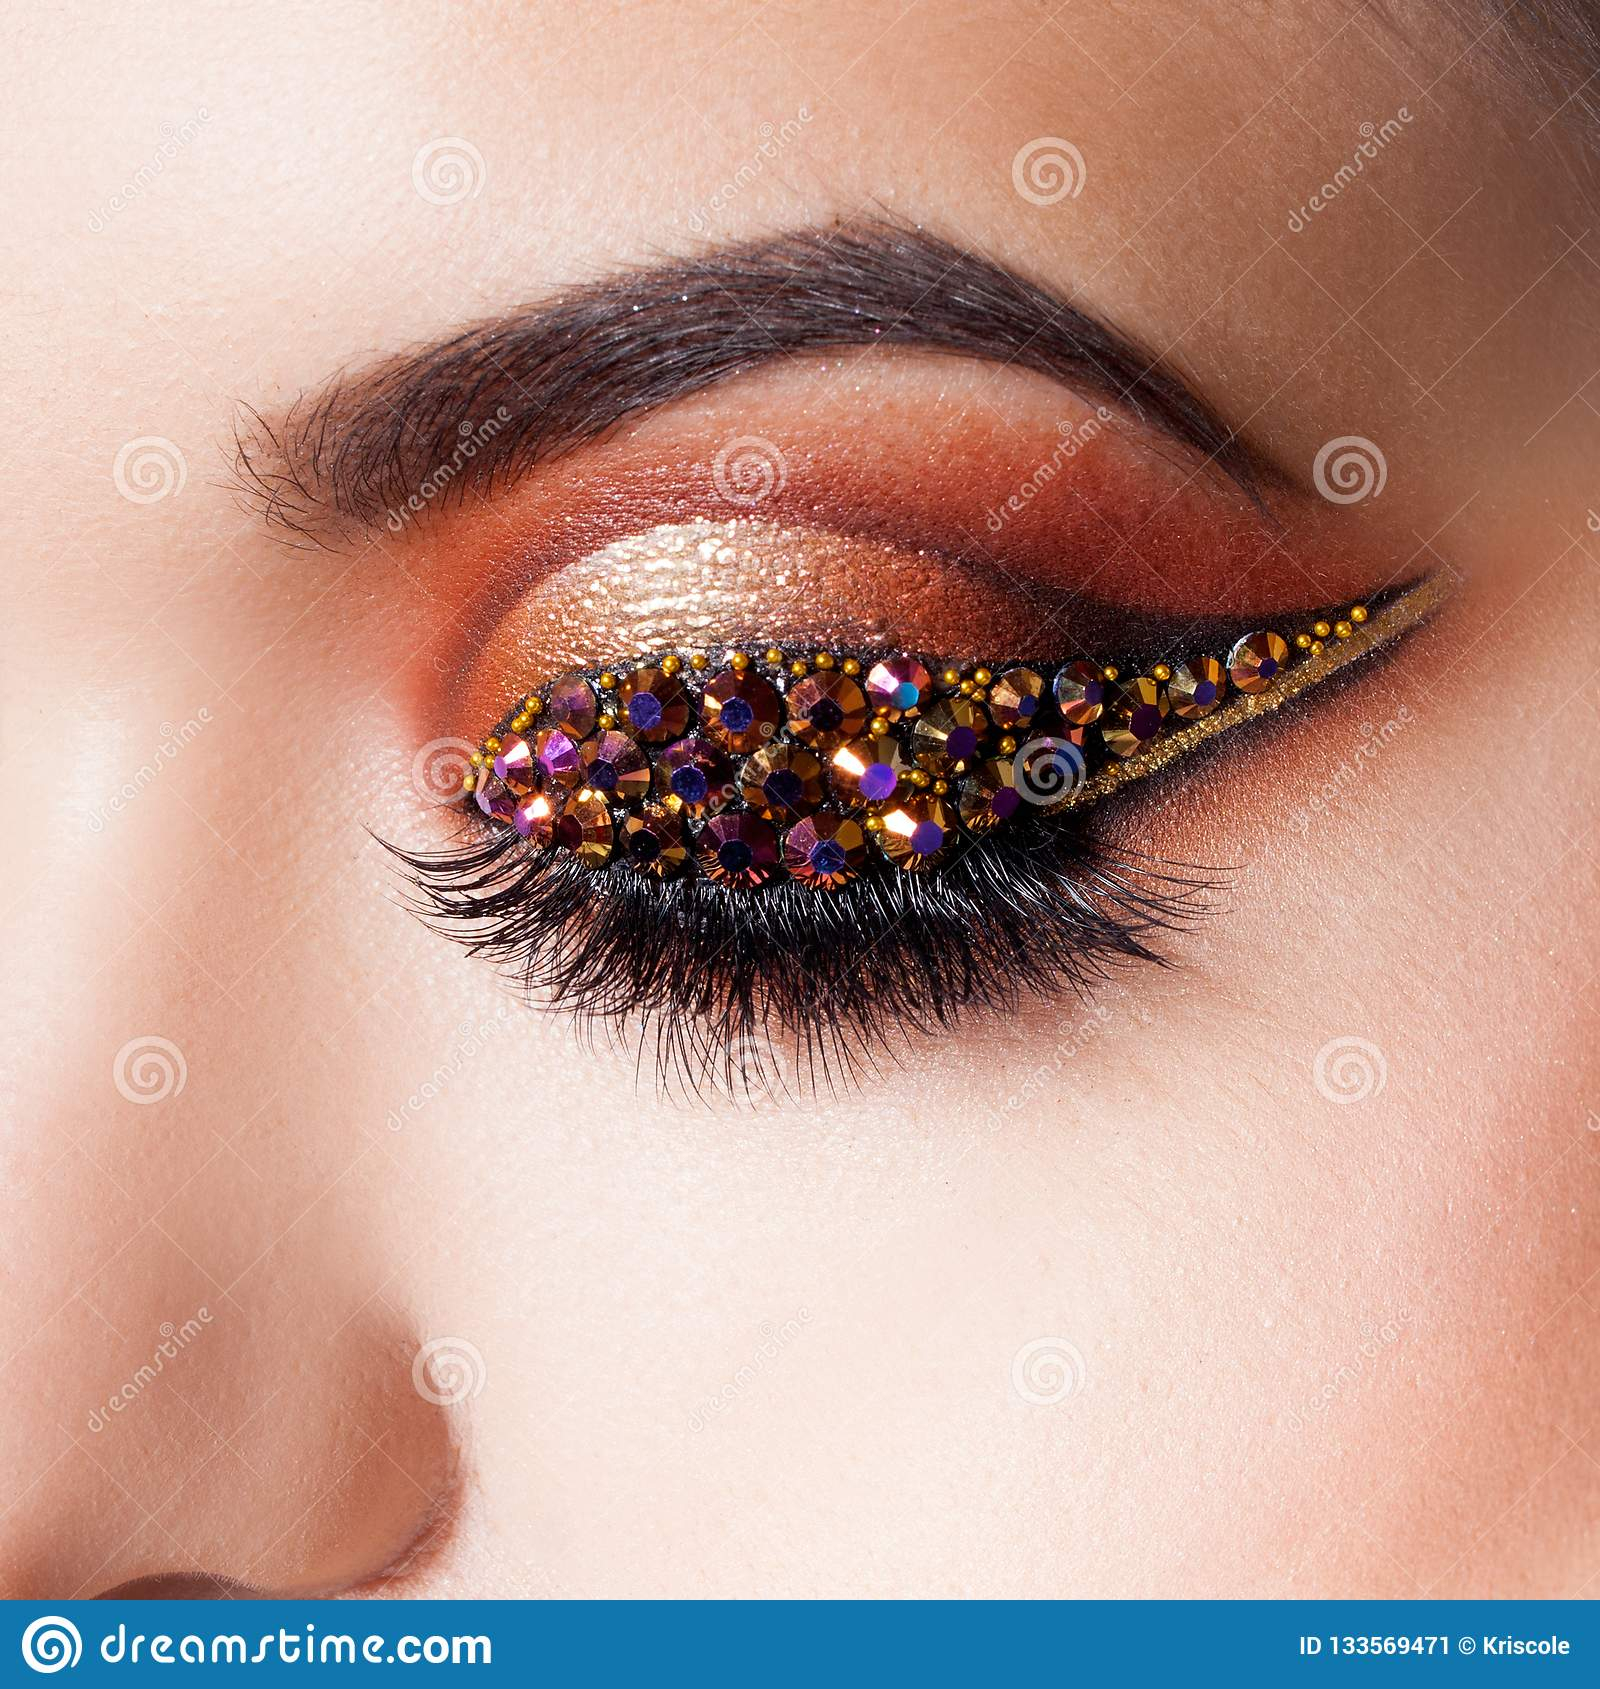 Rhinestones For Eyes Makeup Amazing Bright Eye Makeup With A Arrow With Rhinestones Brown And